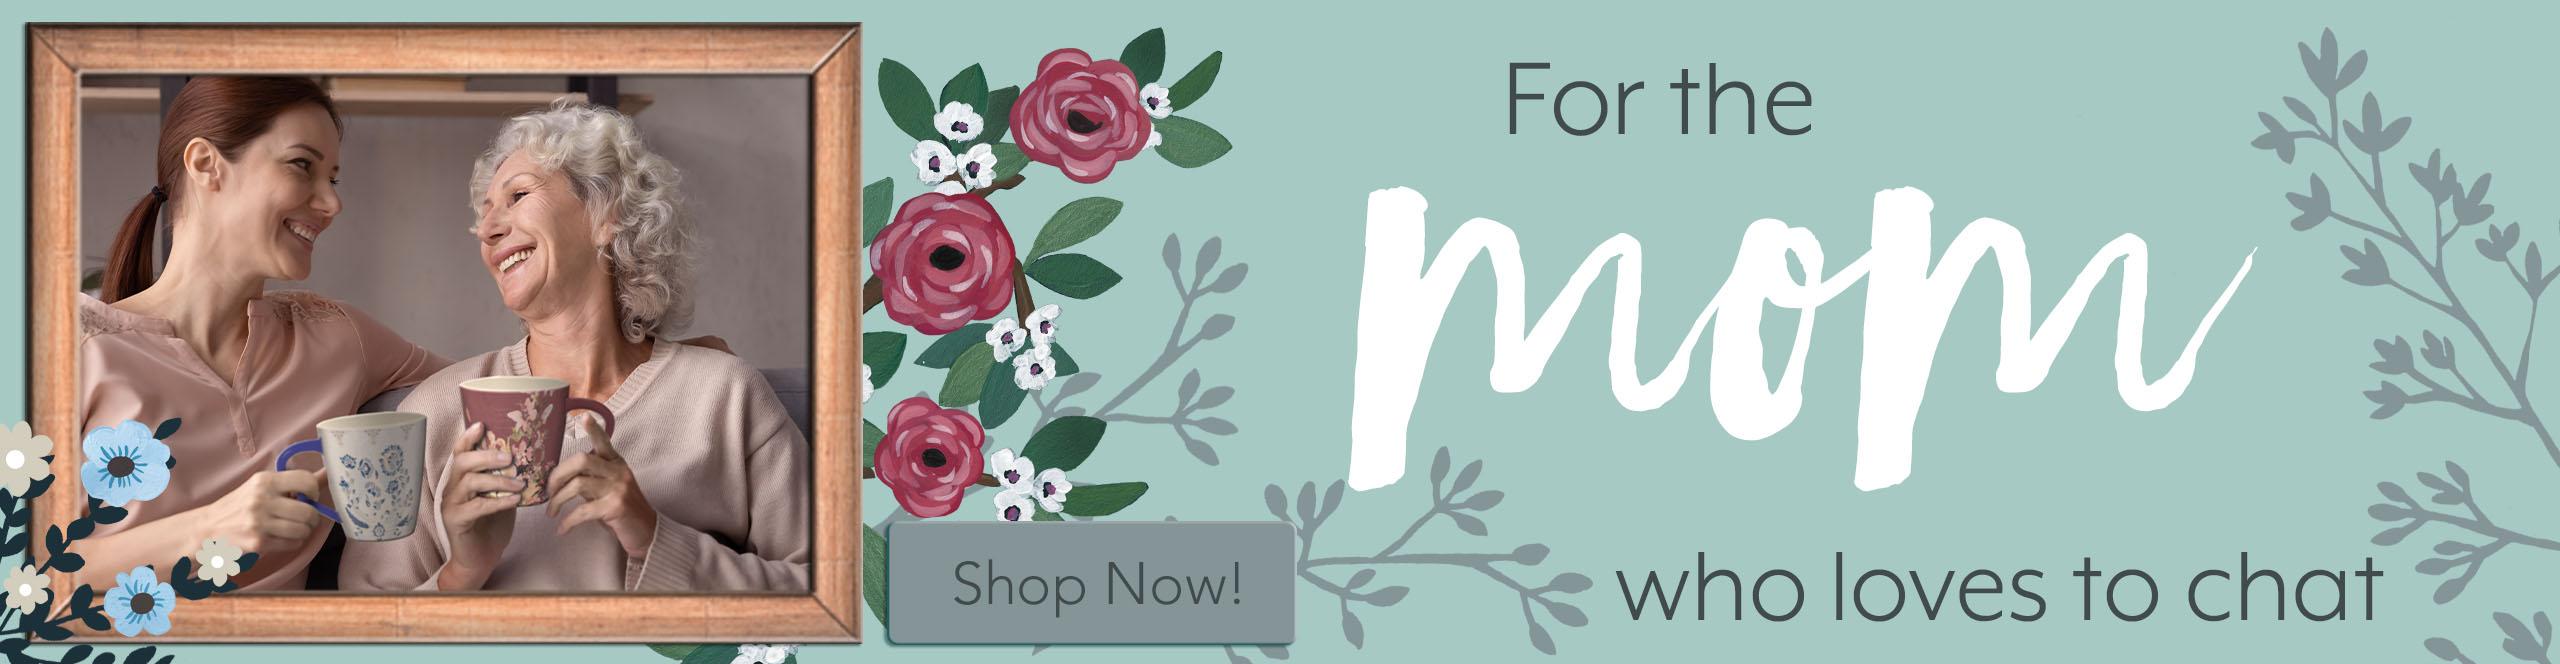 Get 15% Off and FREE SHIPPING on orders $50 or more! Use Code LOVEMOM